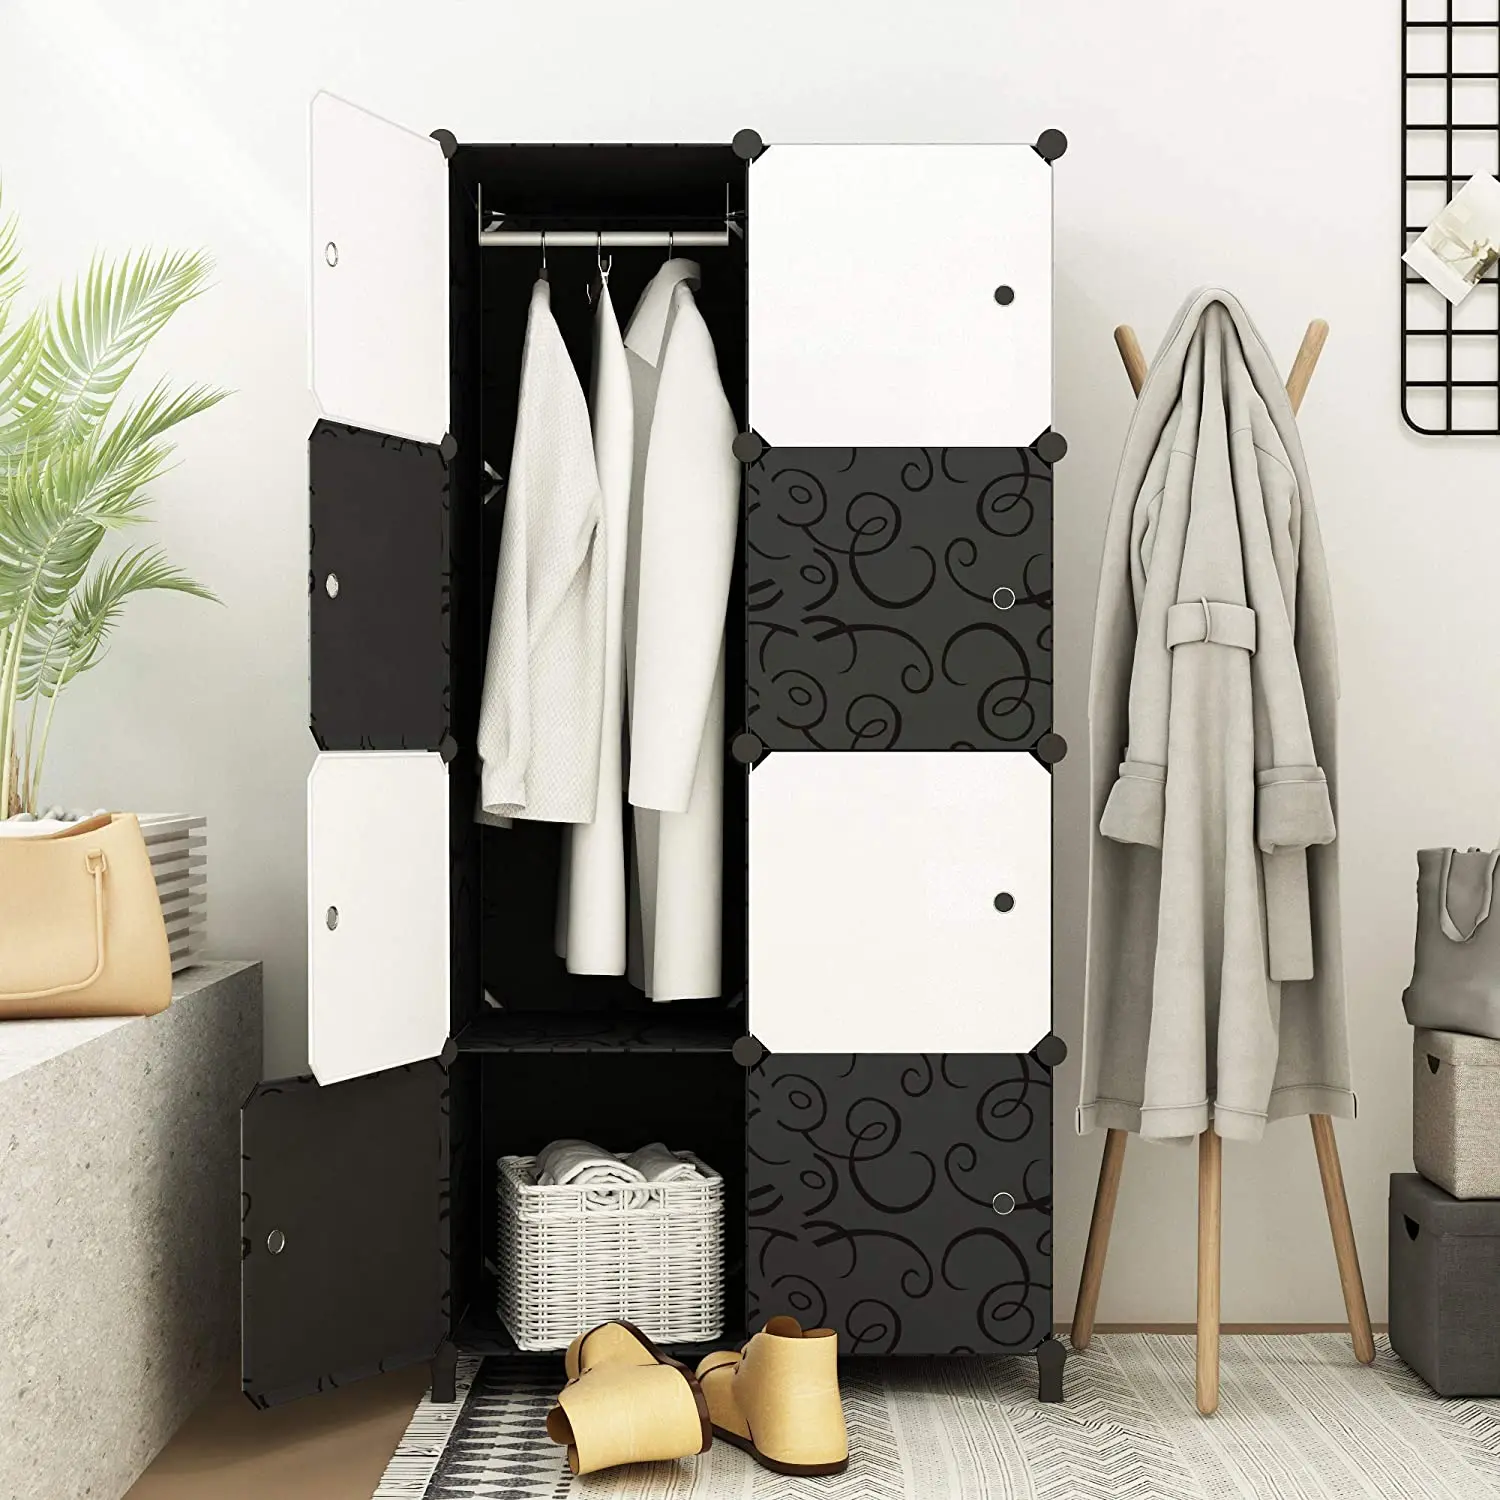 16-Cube Ideal Storage Organizer Cube Closet for books Modular Cabinet for Space Saving Combination Armoire PREMAG Portable Wardrobe for Hanging Clothes toys towels 